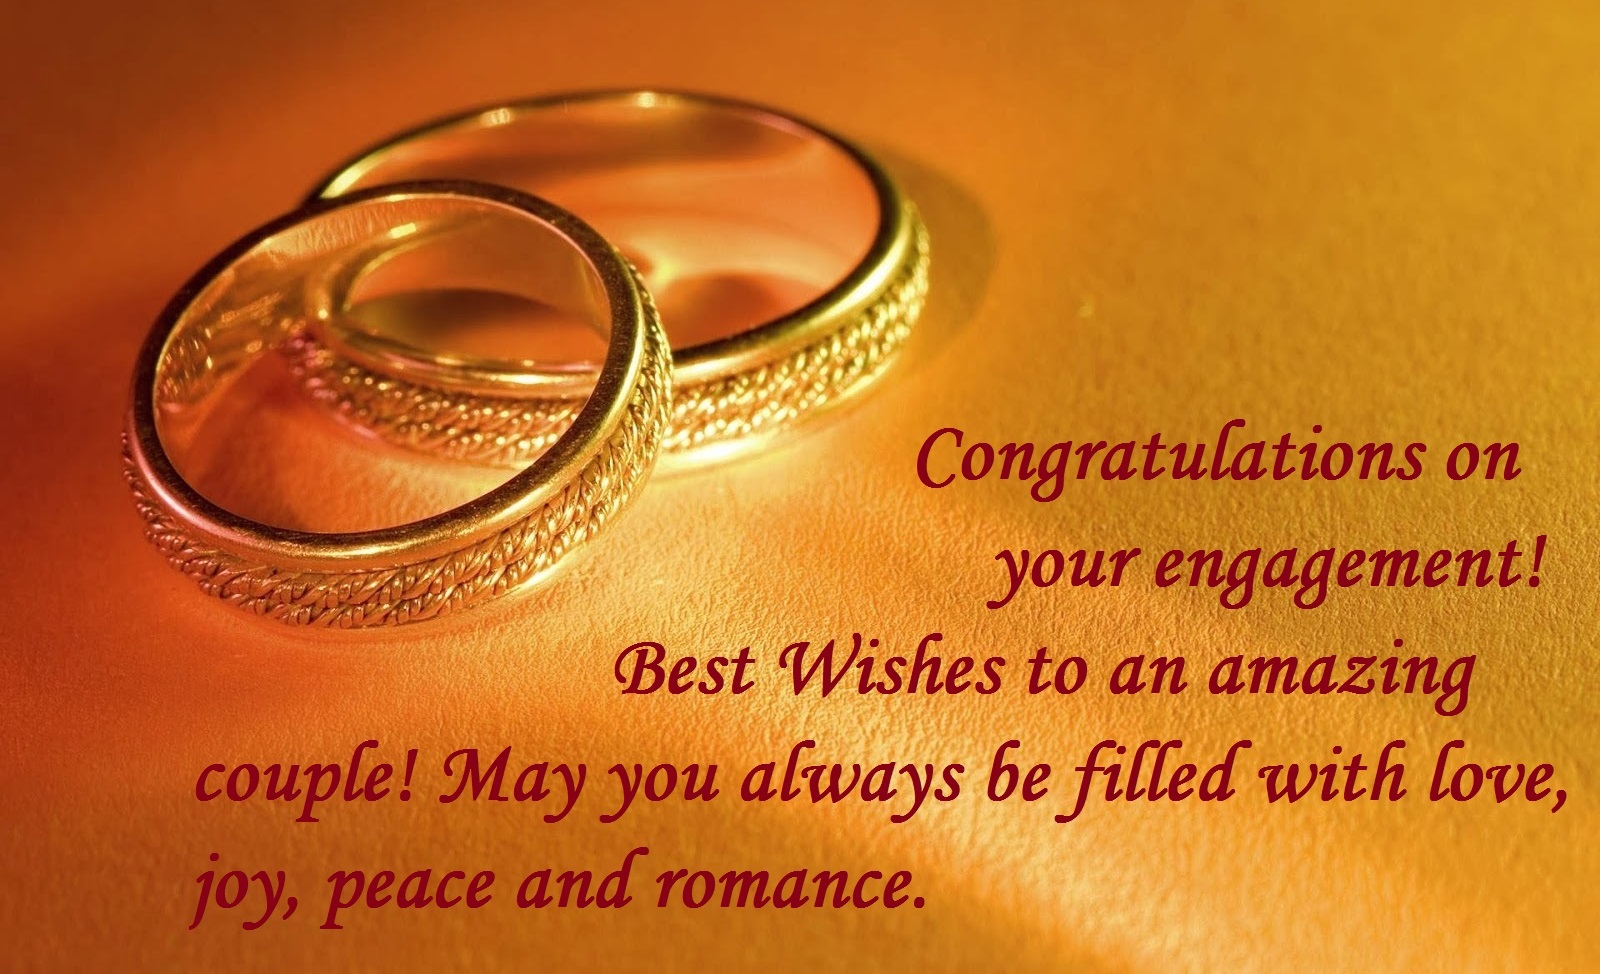 Lovely Engagement Wishes With Awesome HD Images